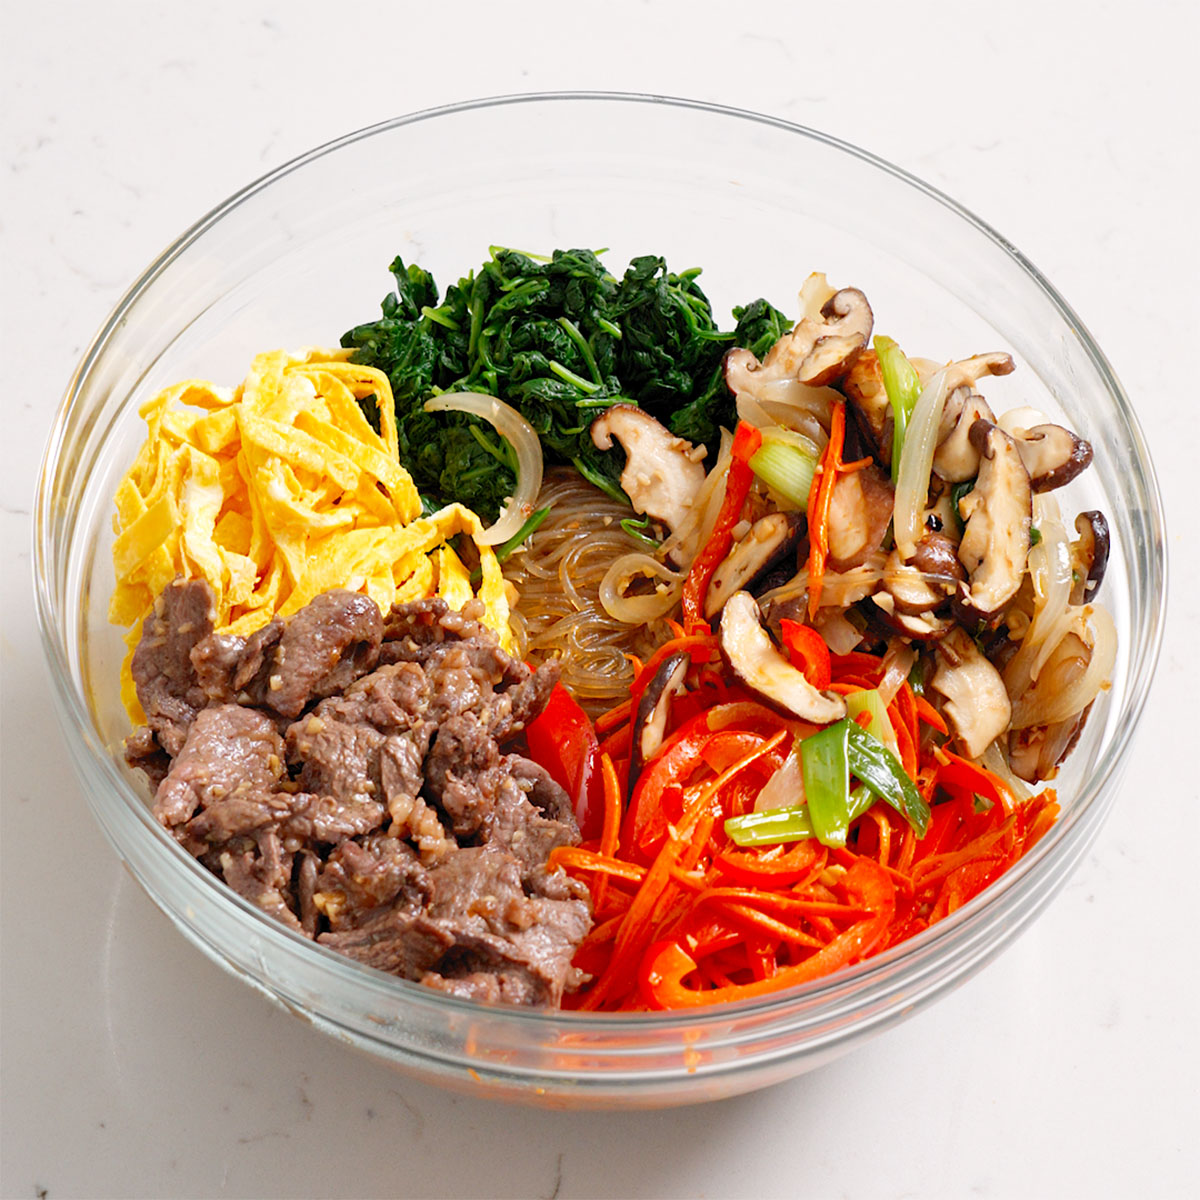 All the ingredients for japchae organized in a large mixing bowl before combining.